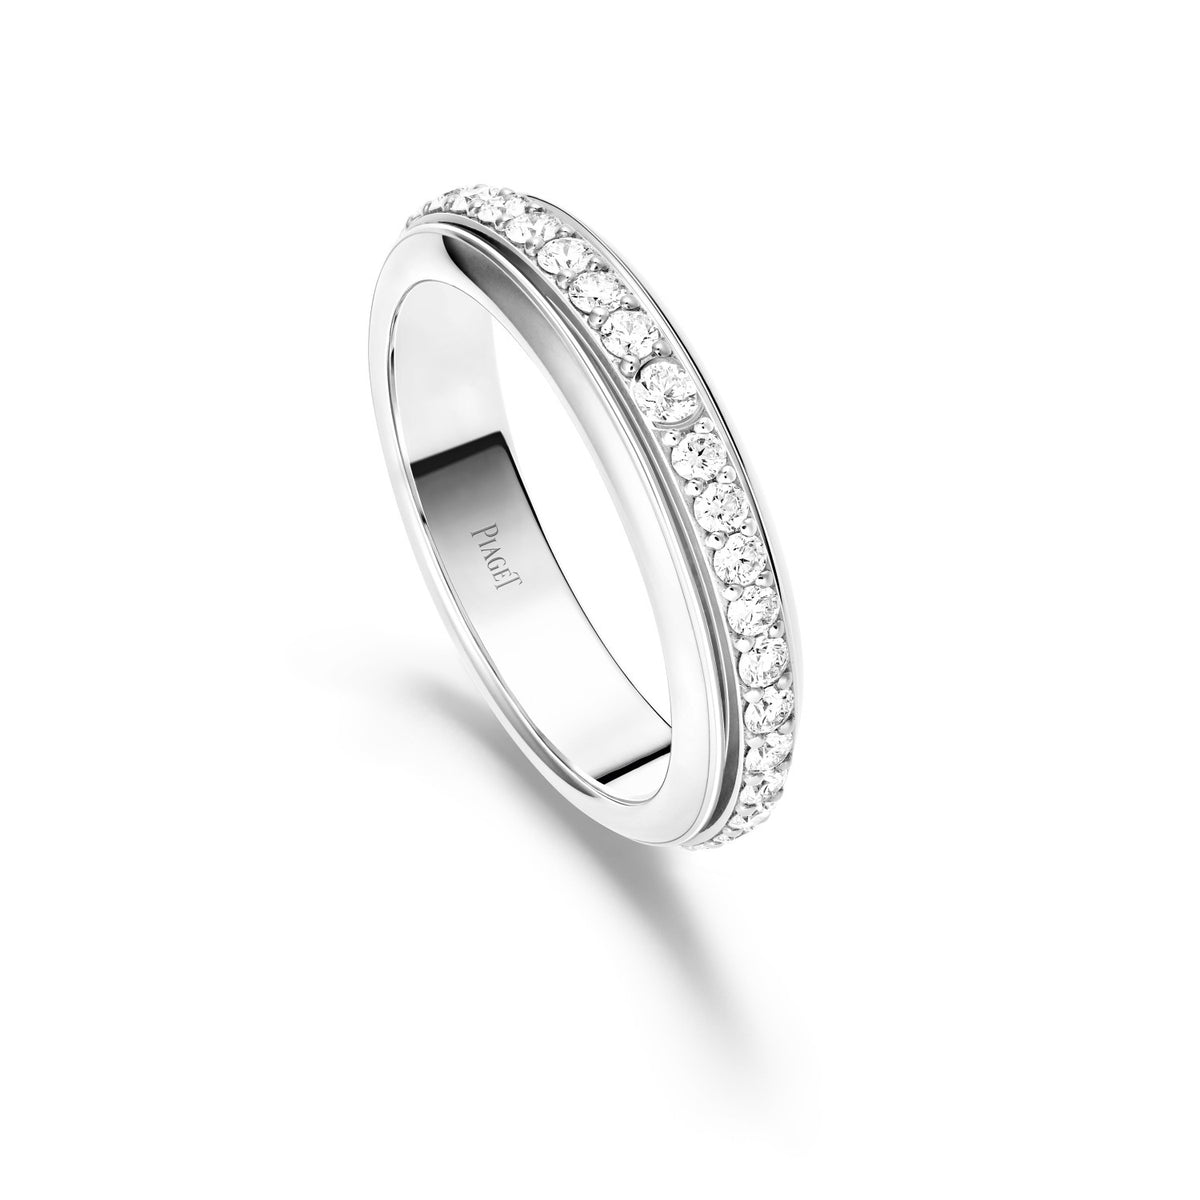 Possession ring in 18K white gold set with 36 brilliant-cut diamonds (approx. 0.7 ct).